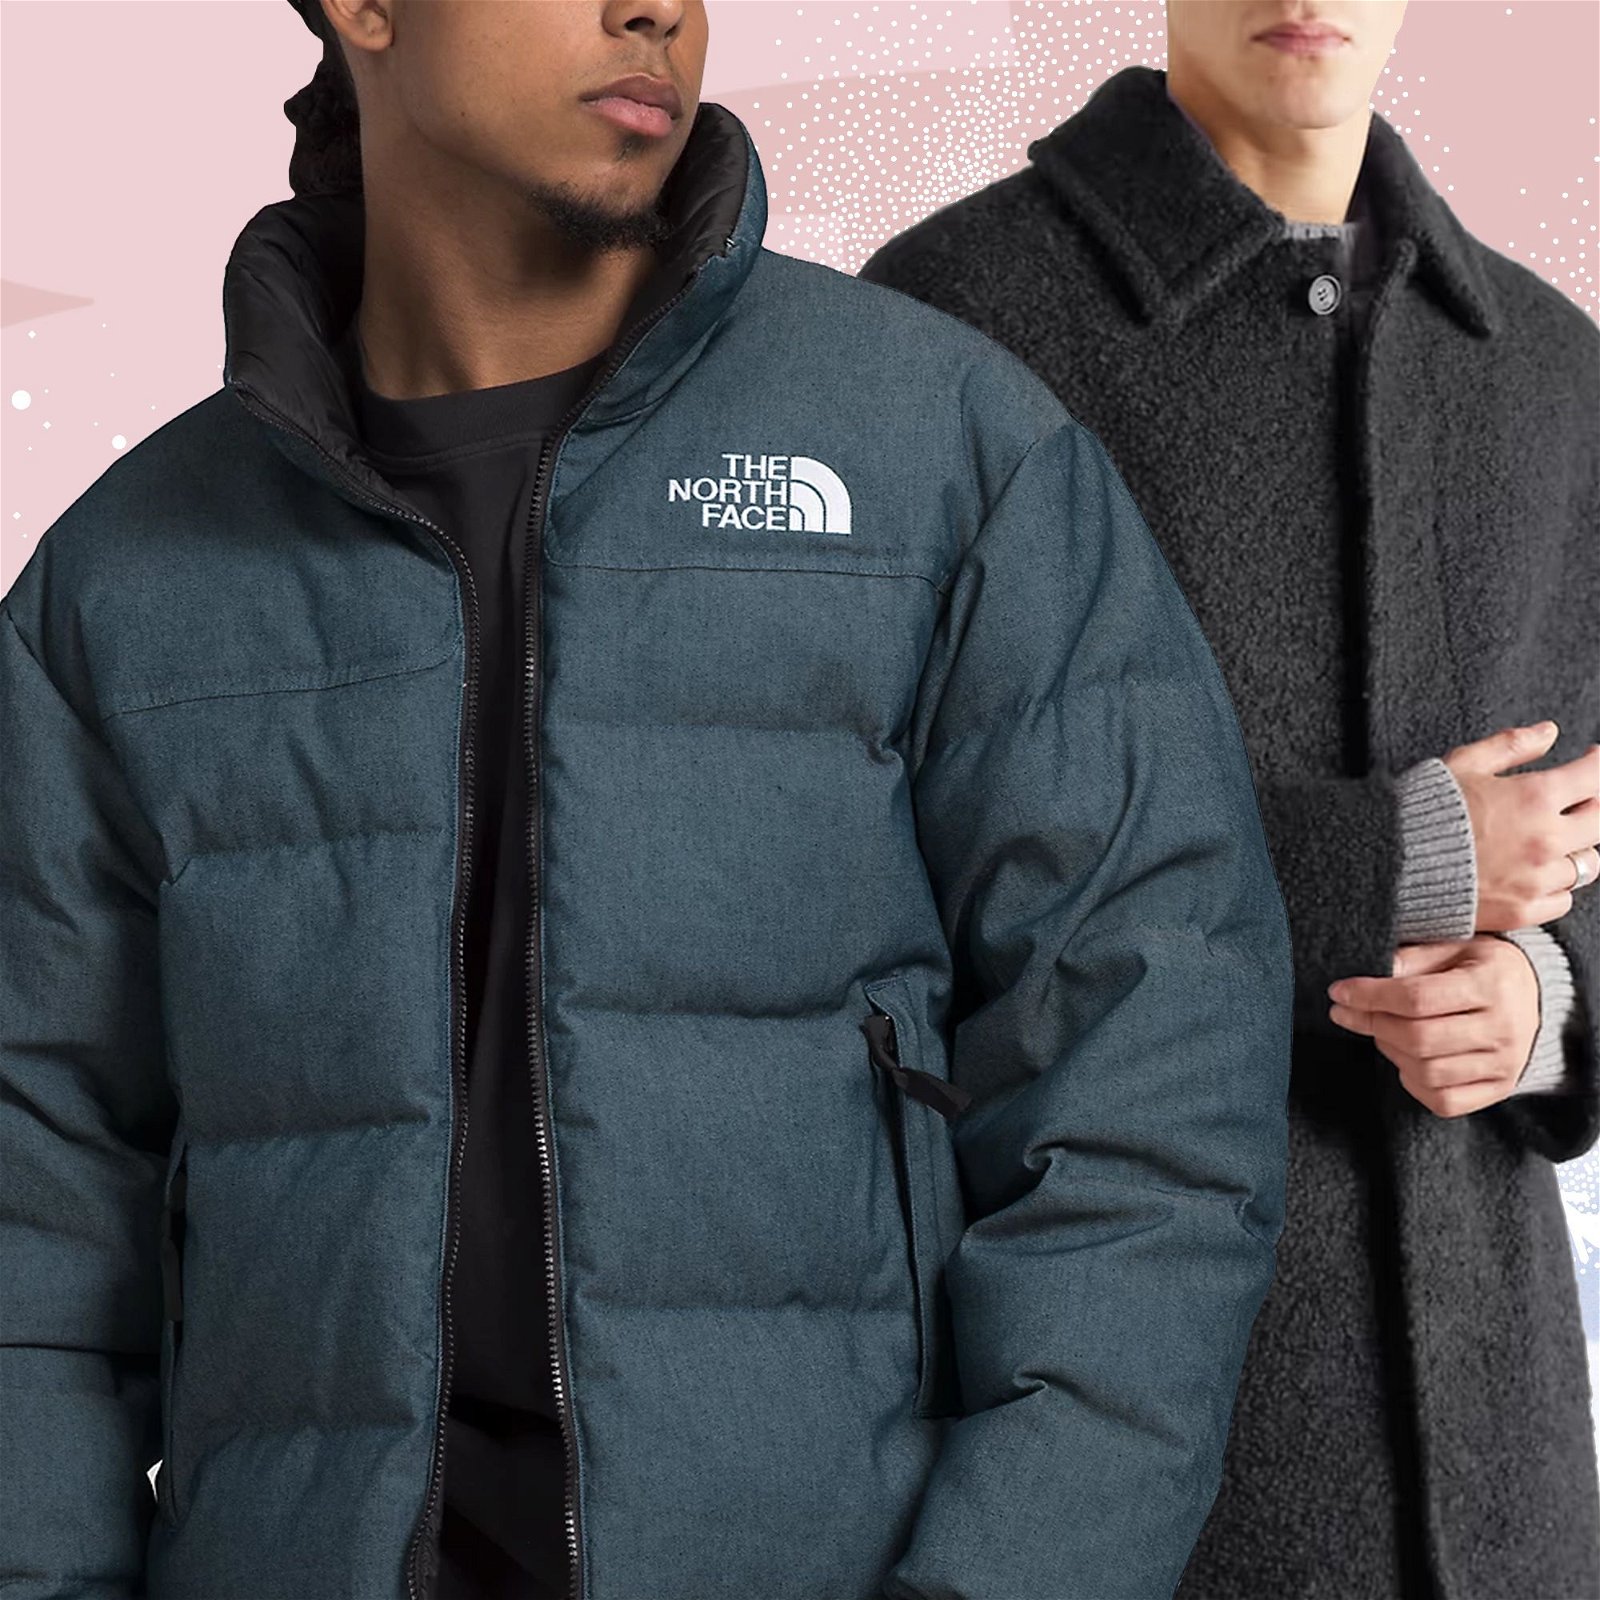 21 Winter Coats to Snap Up in End-of-Season Sales